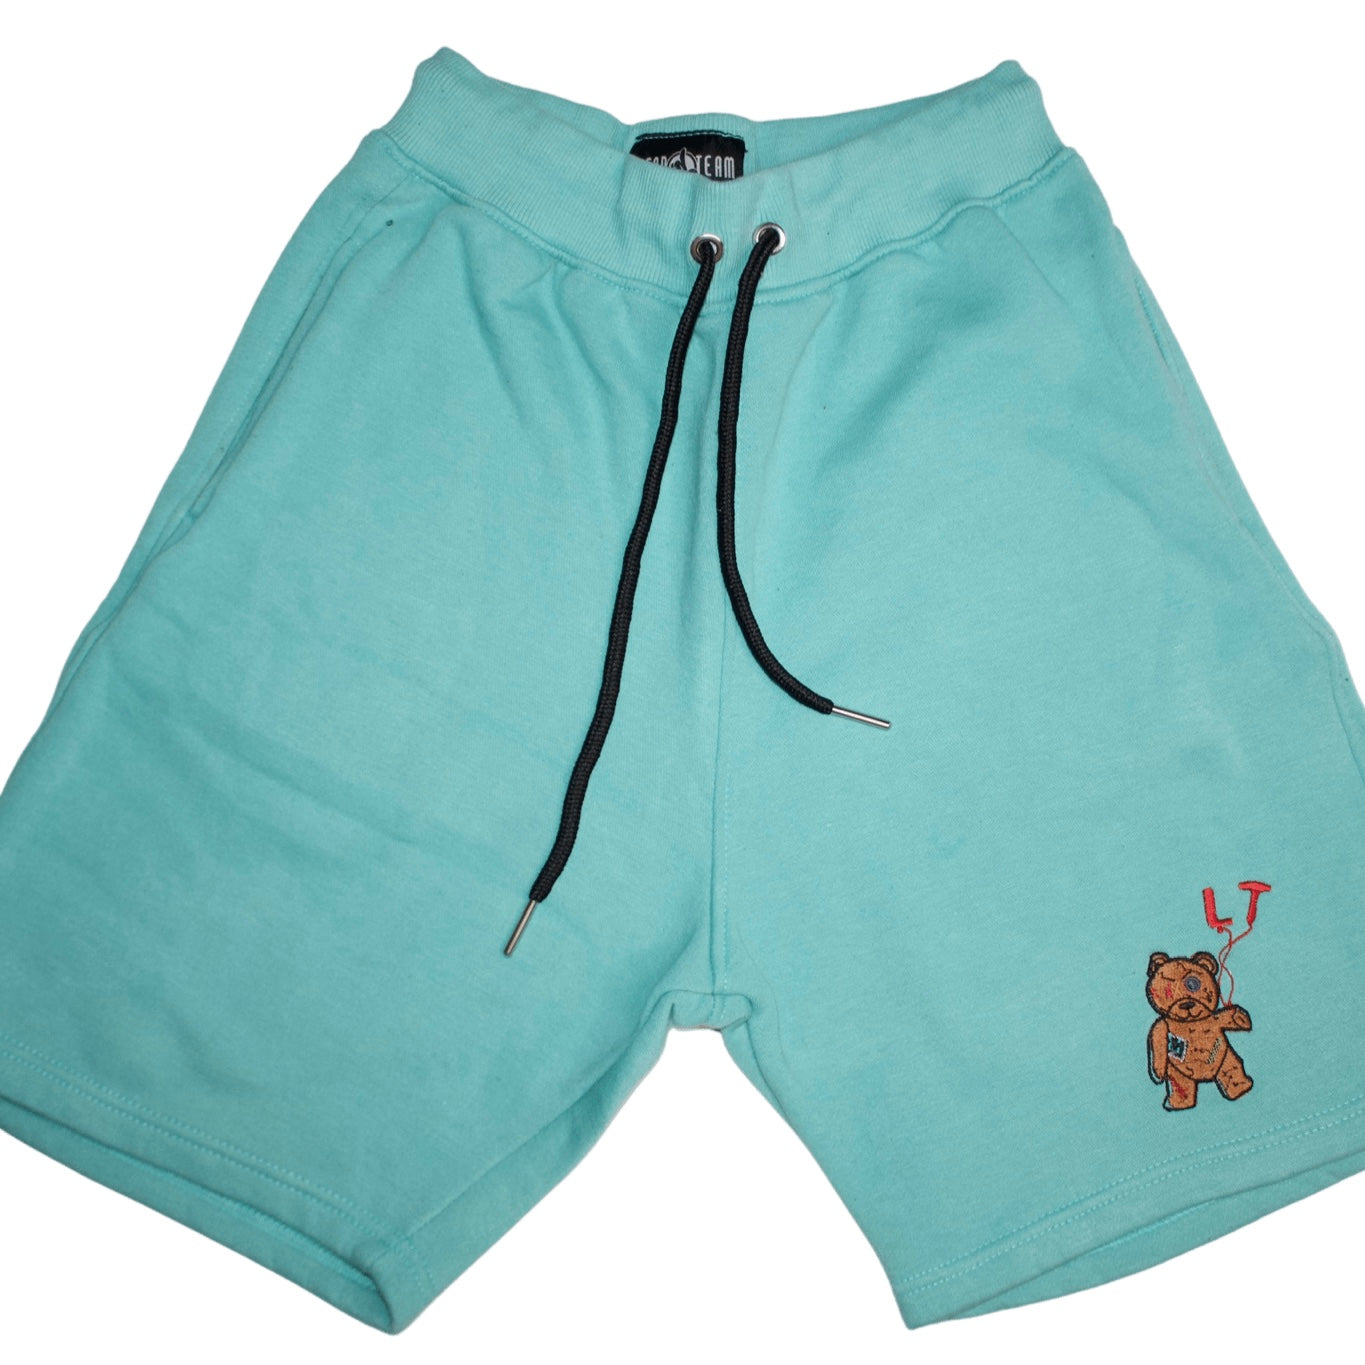 LT Teddy Shorts Embroidery (Turquoise)